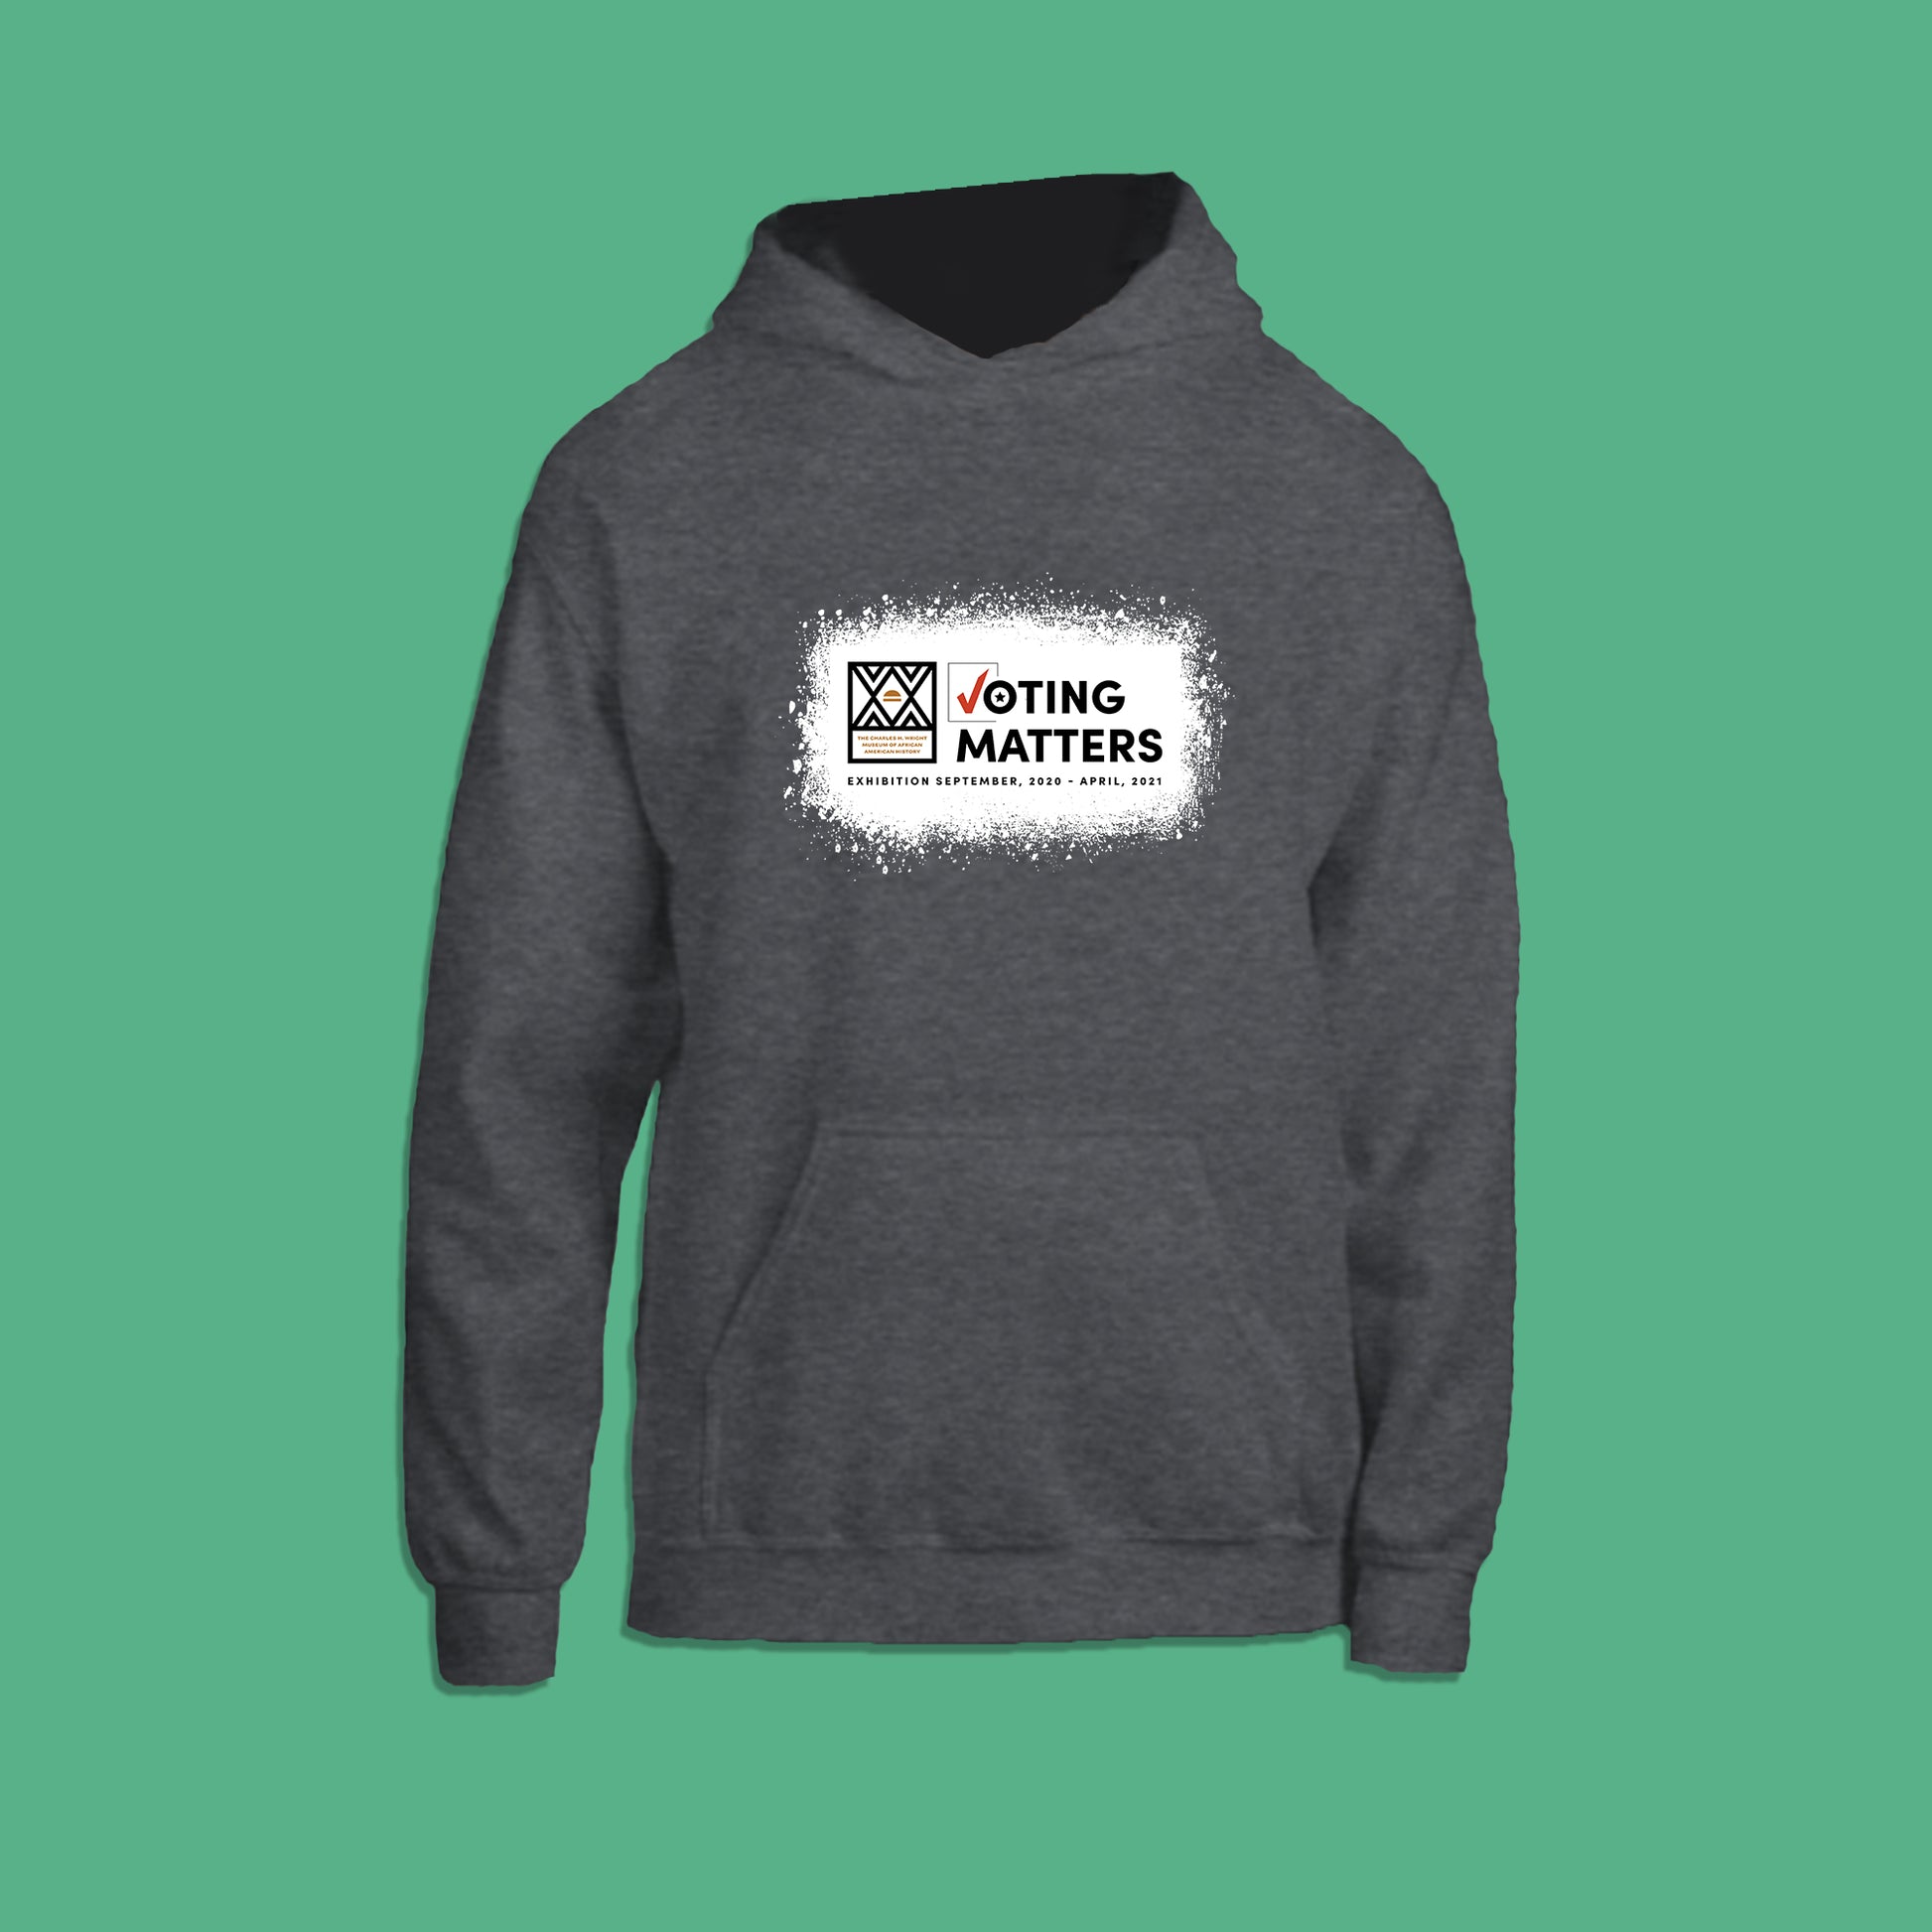 heather grey hoodie with Wright Museum's Voting Matters exhibition logo on the front